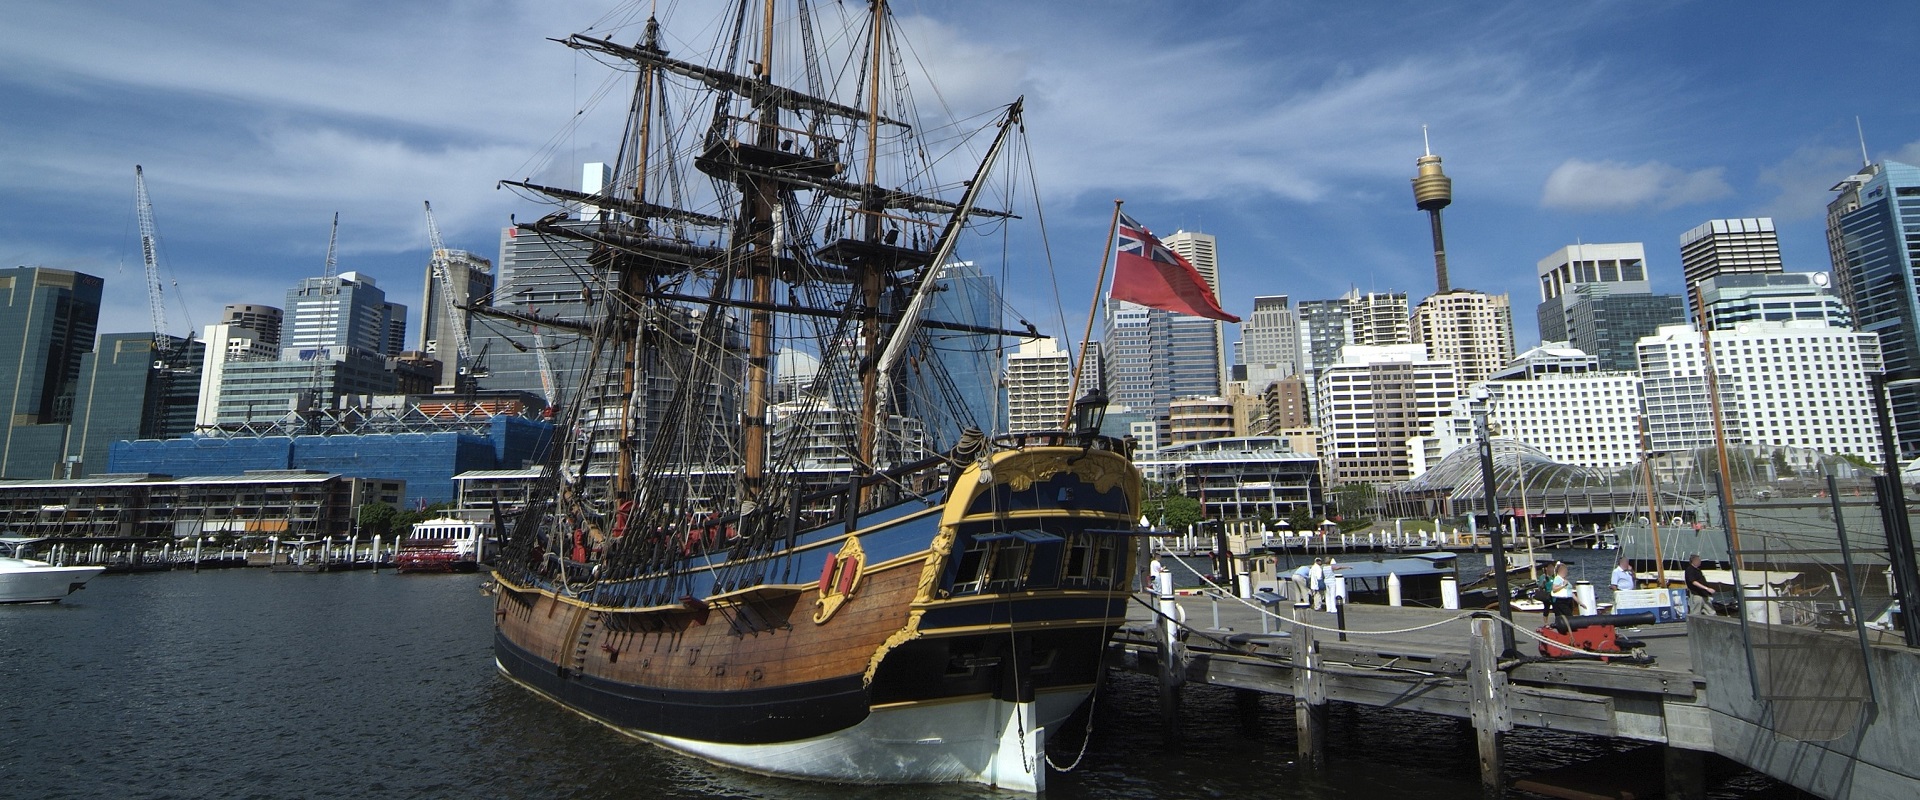 The HMB Endeavour. Image: Getty